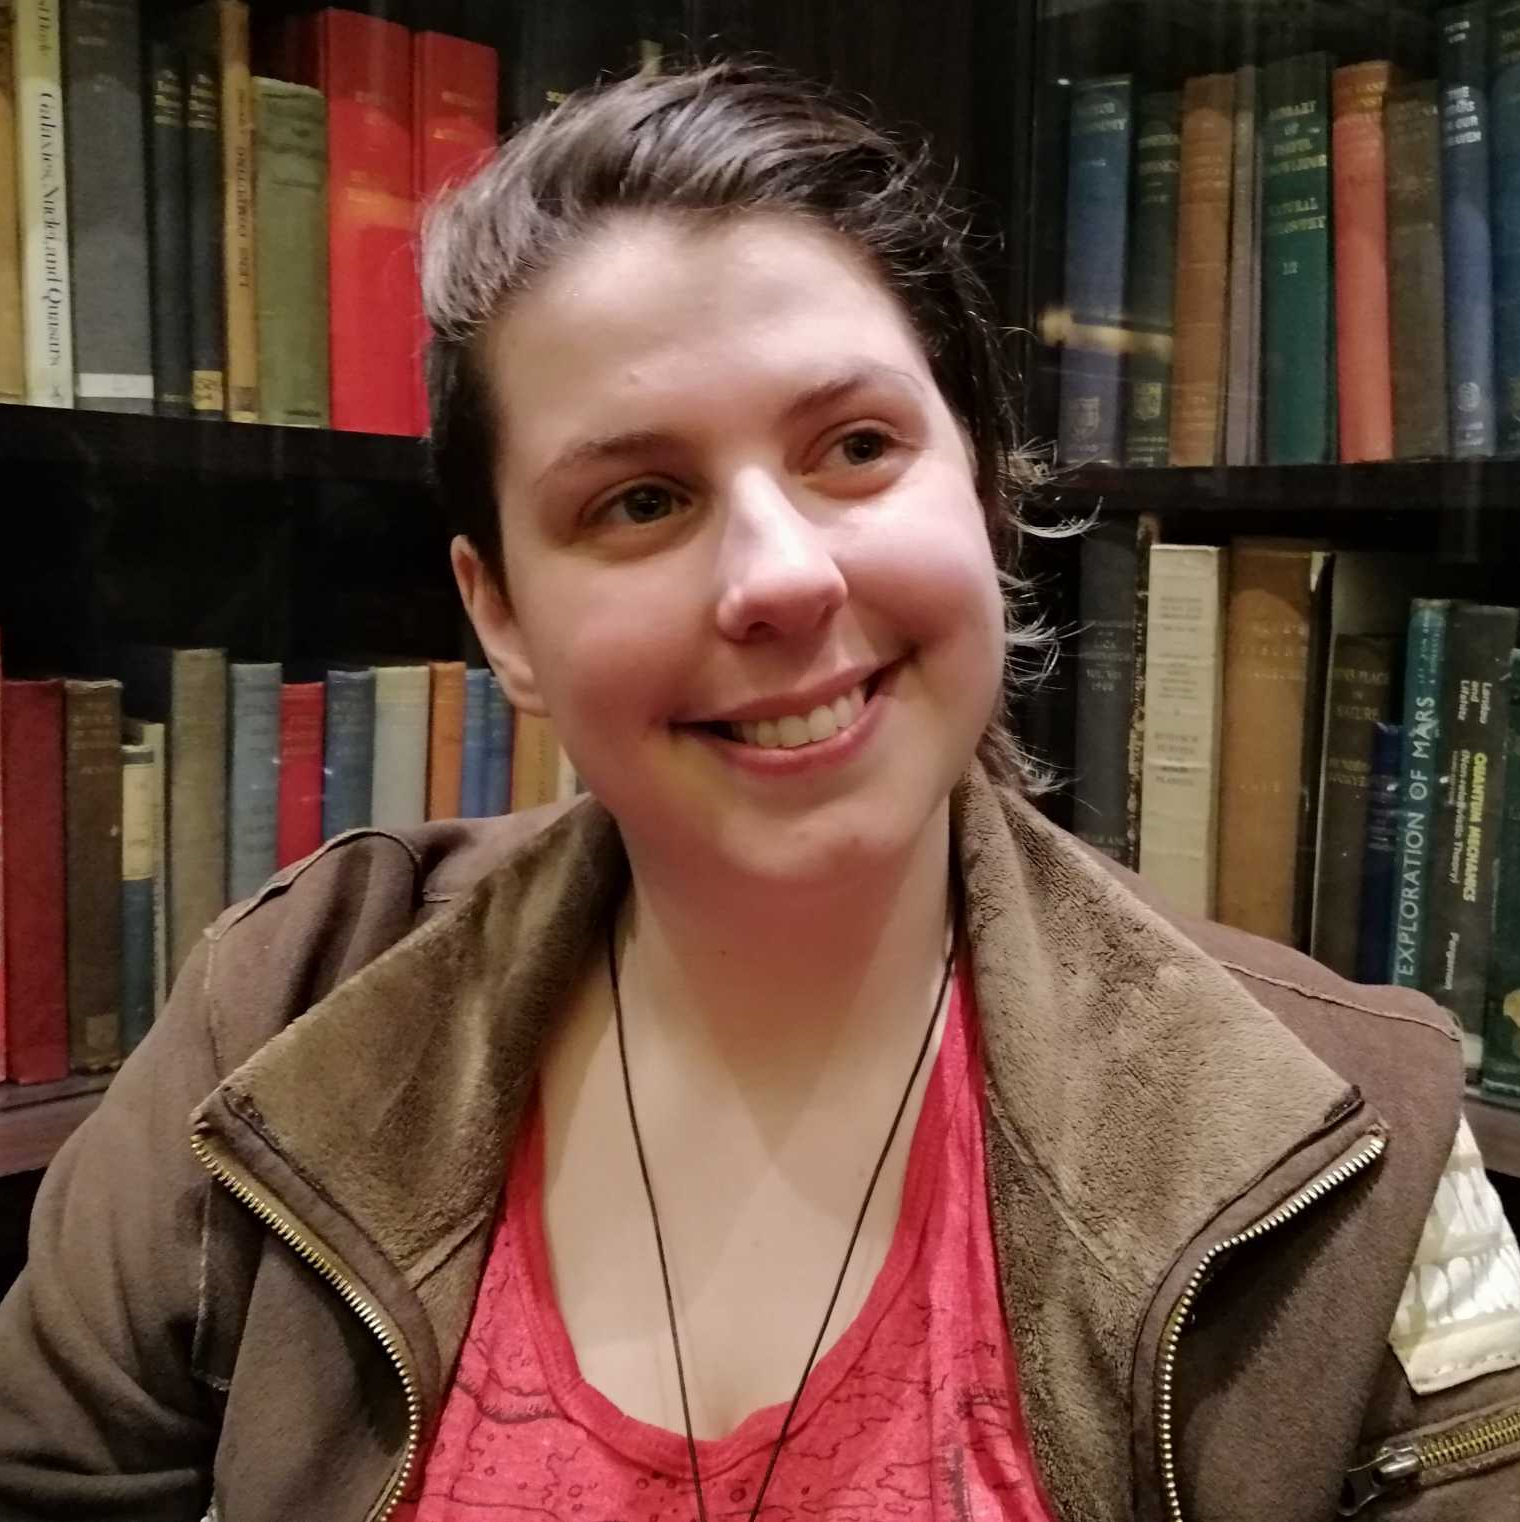 rem is white with brown hair, smiling, wearing a brown suede jacket and in front of shelves of old looking books